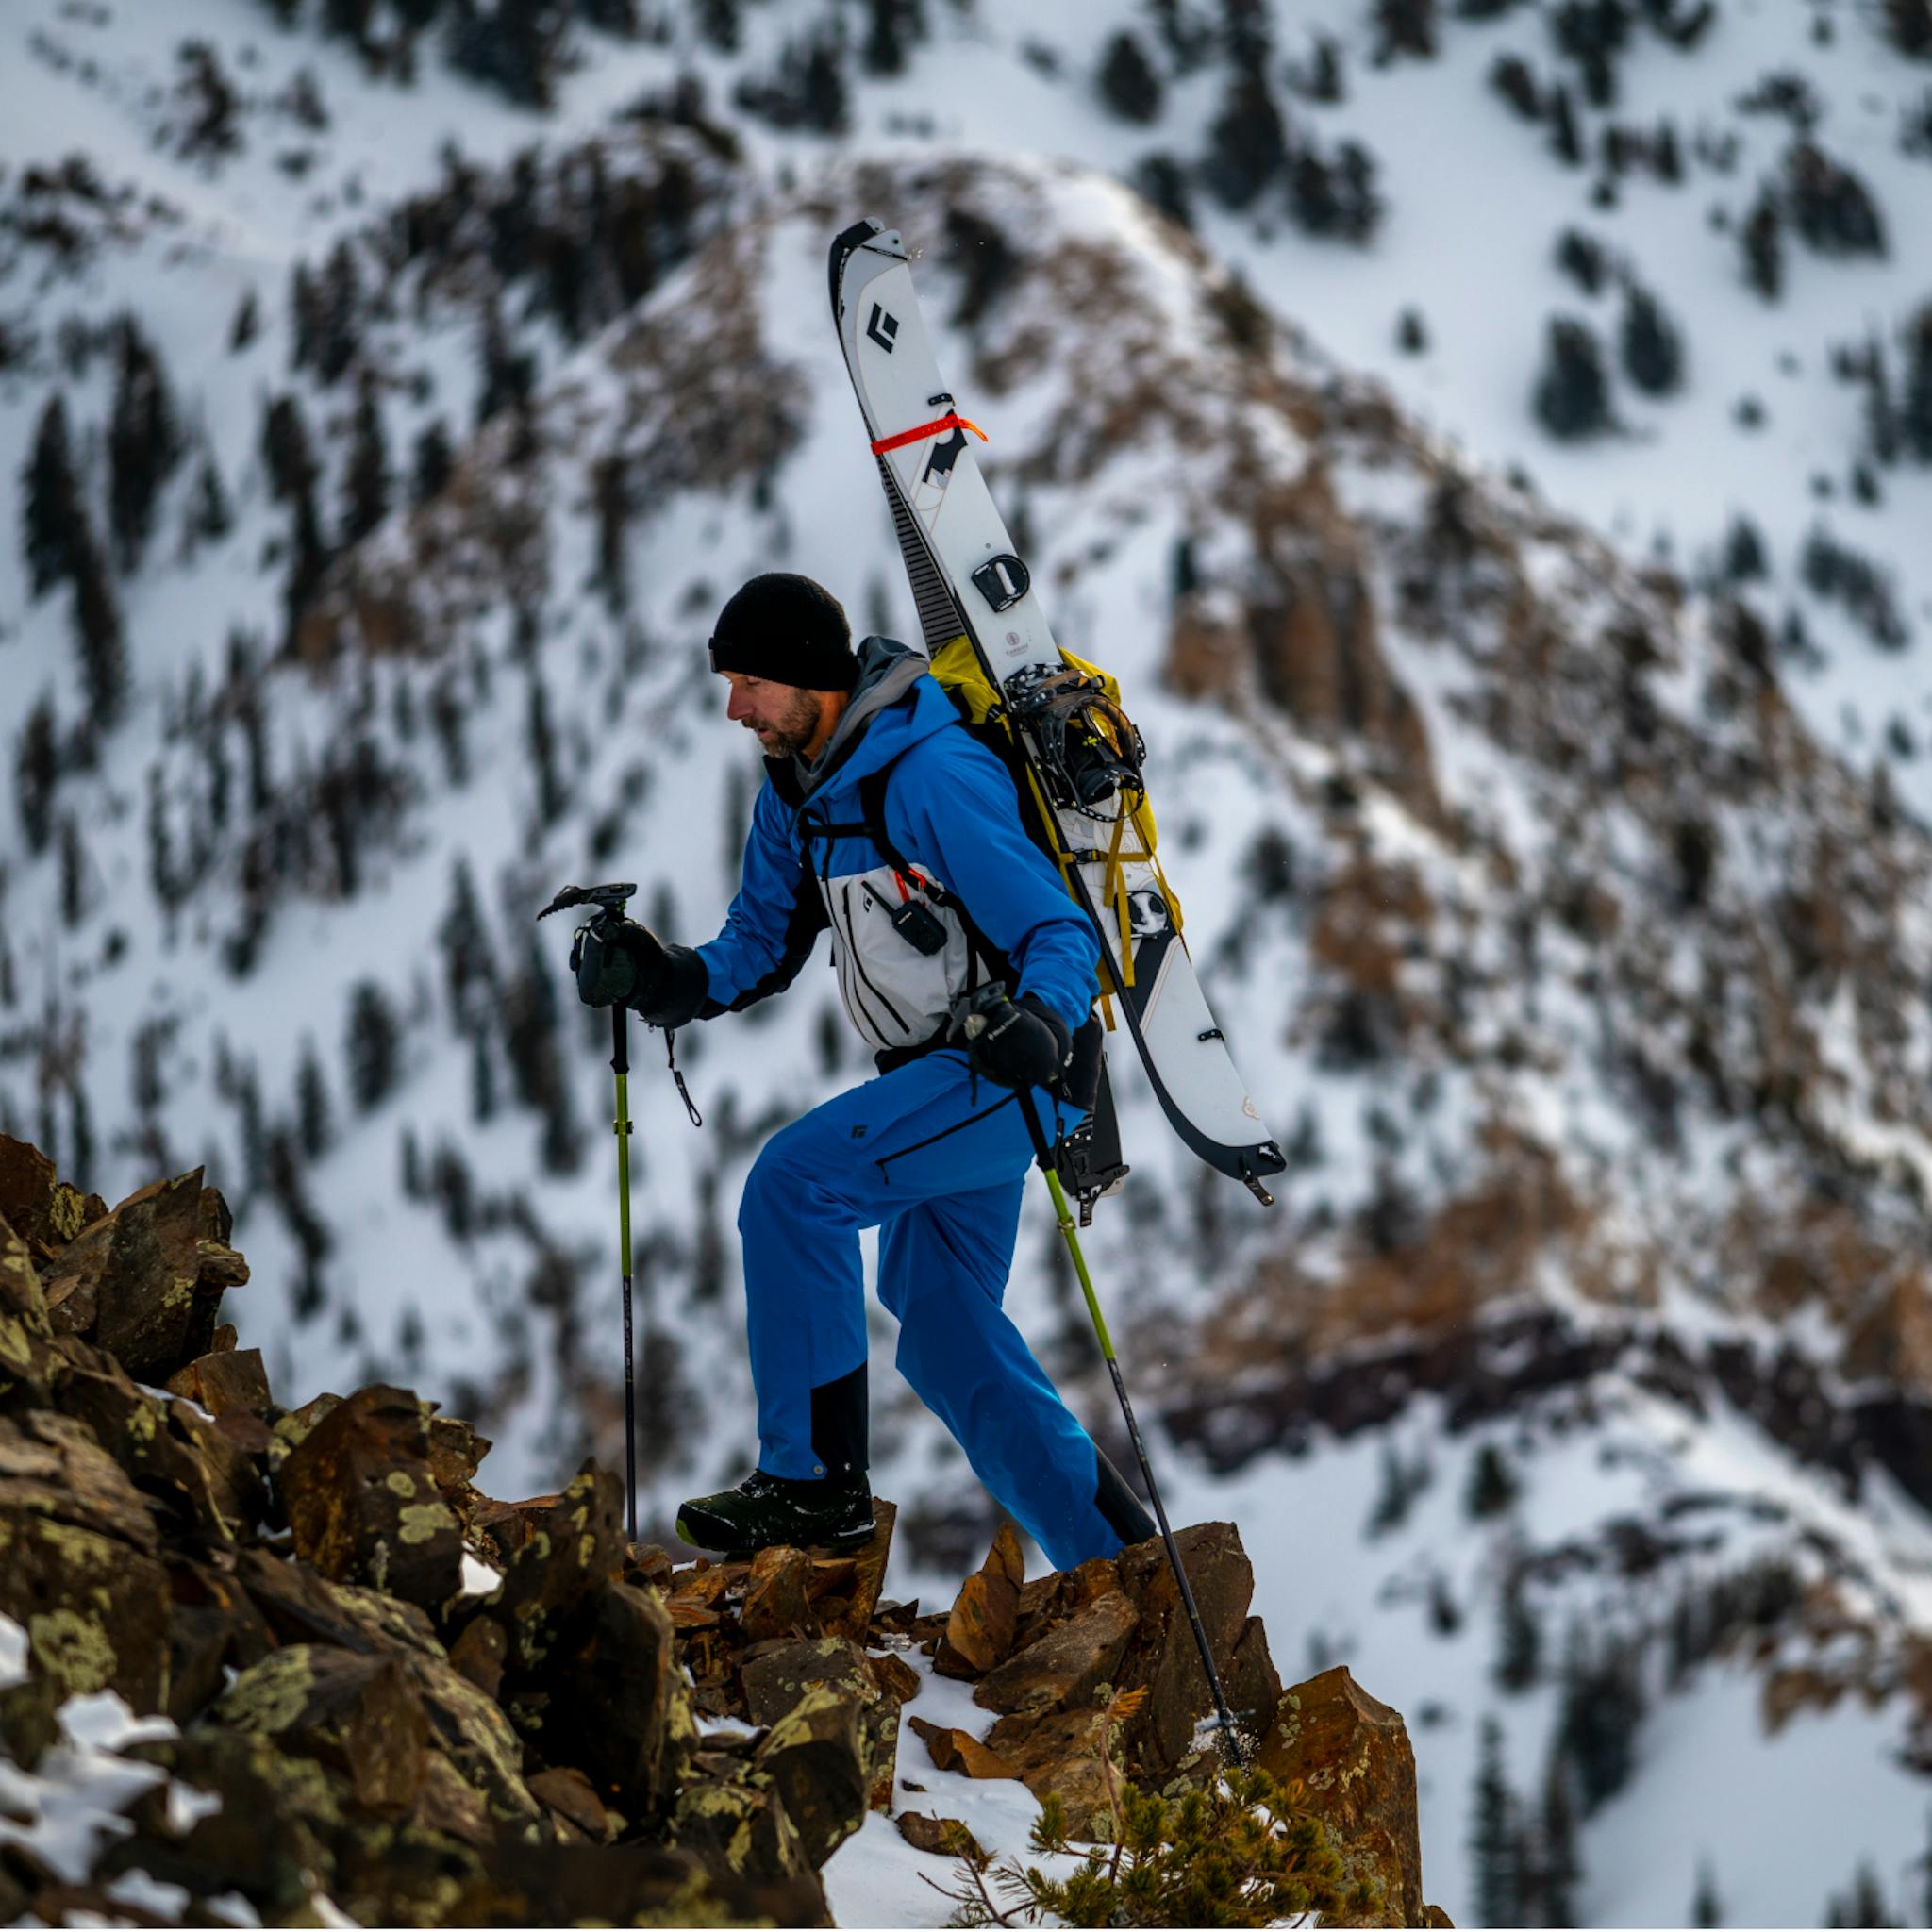 A Splitboarder makes his way up a ridgeline.